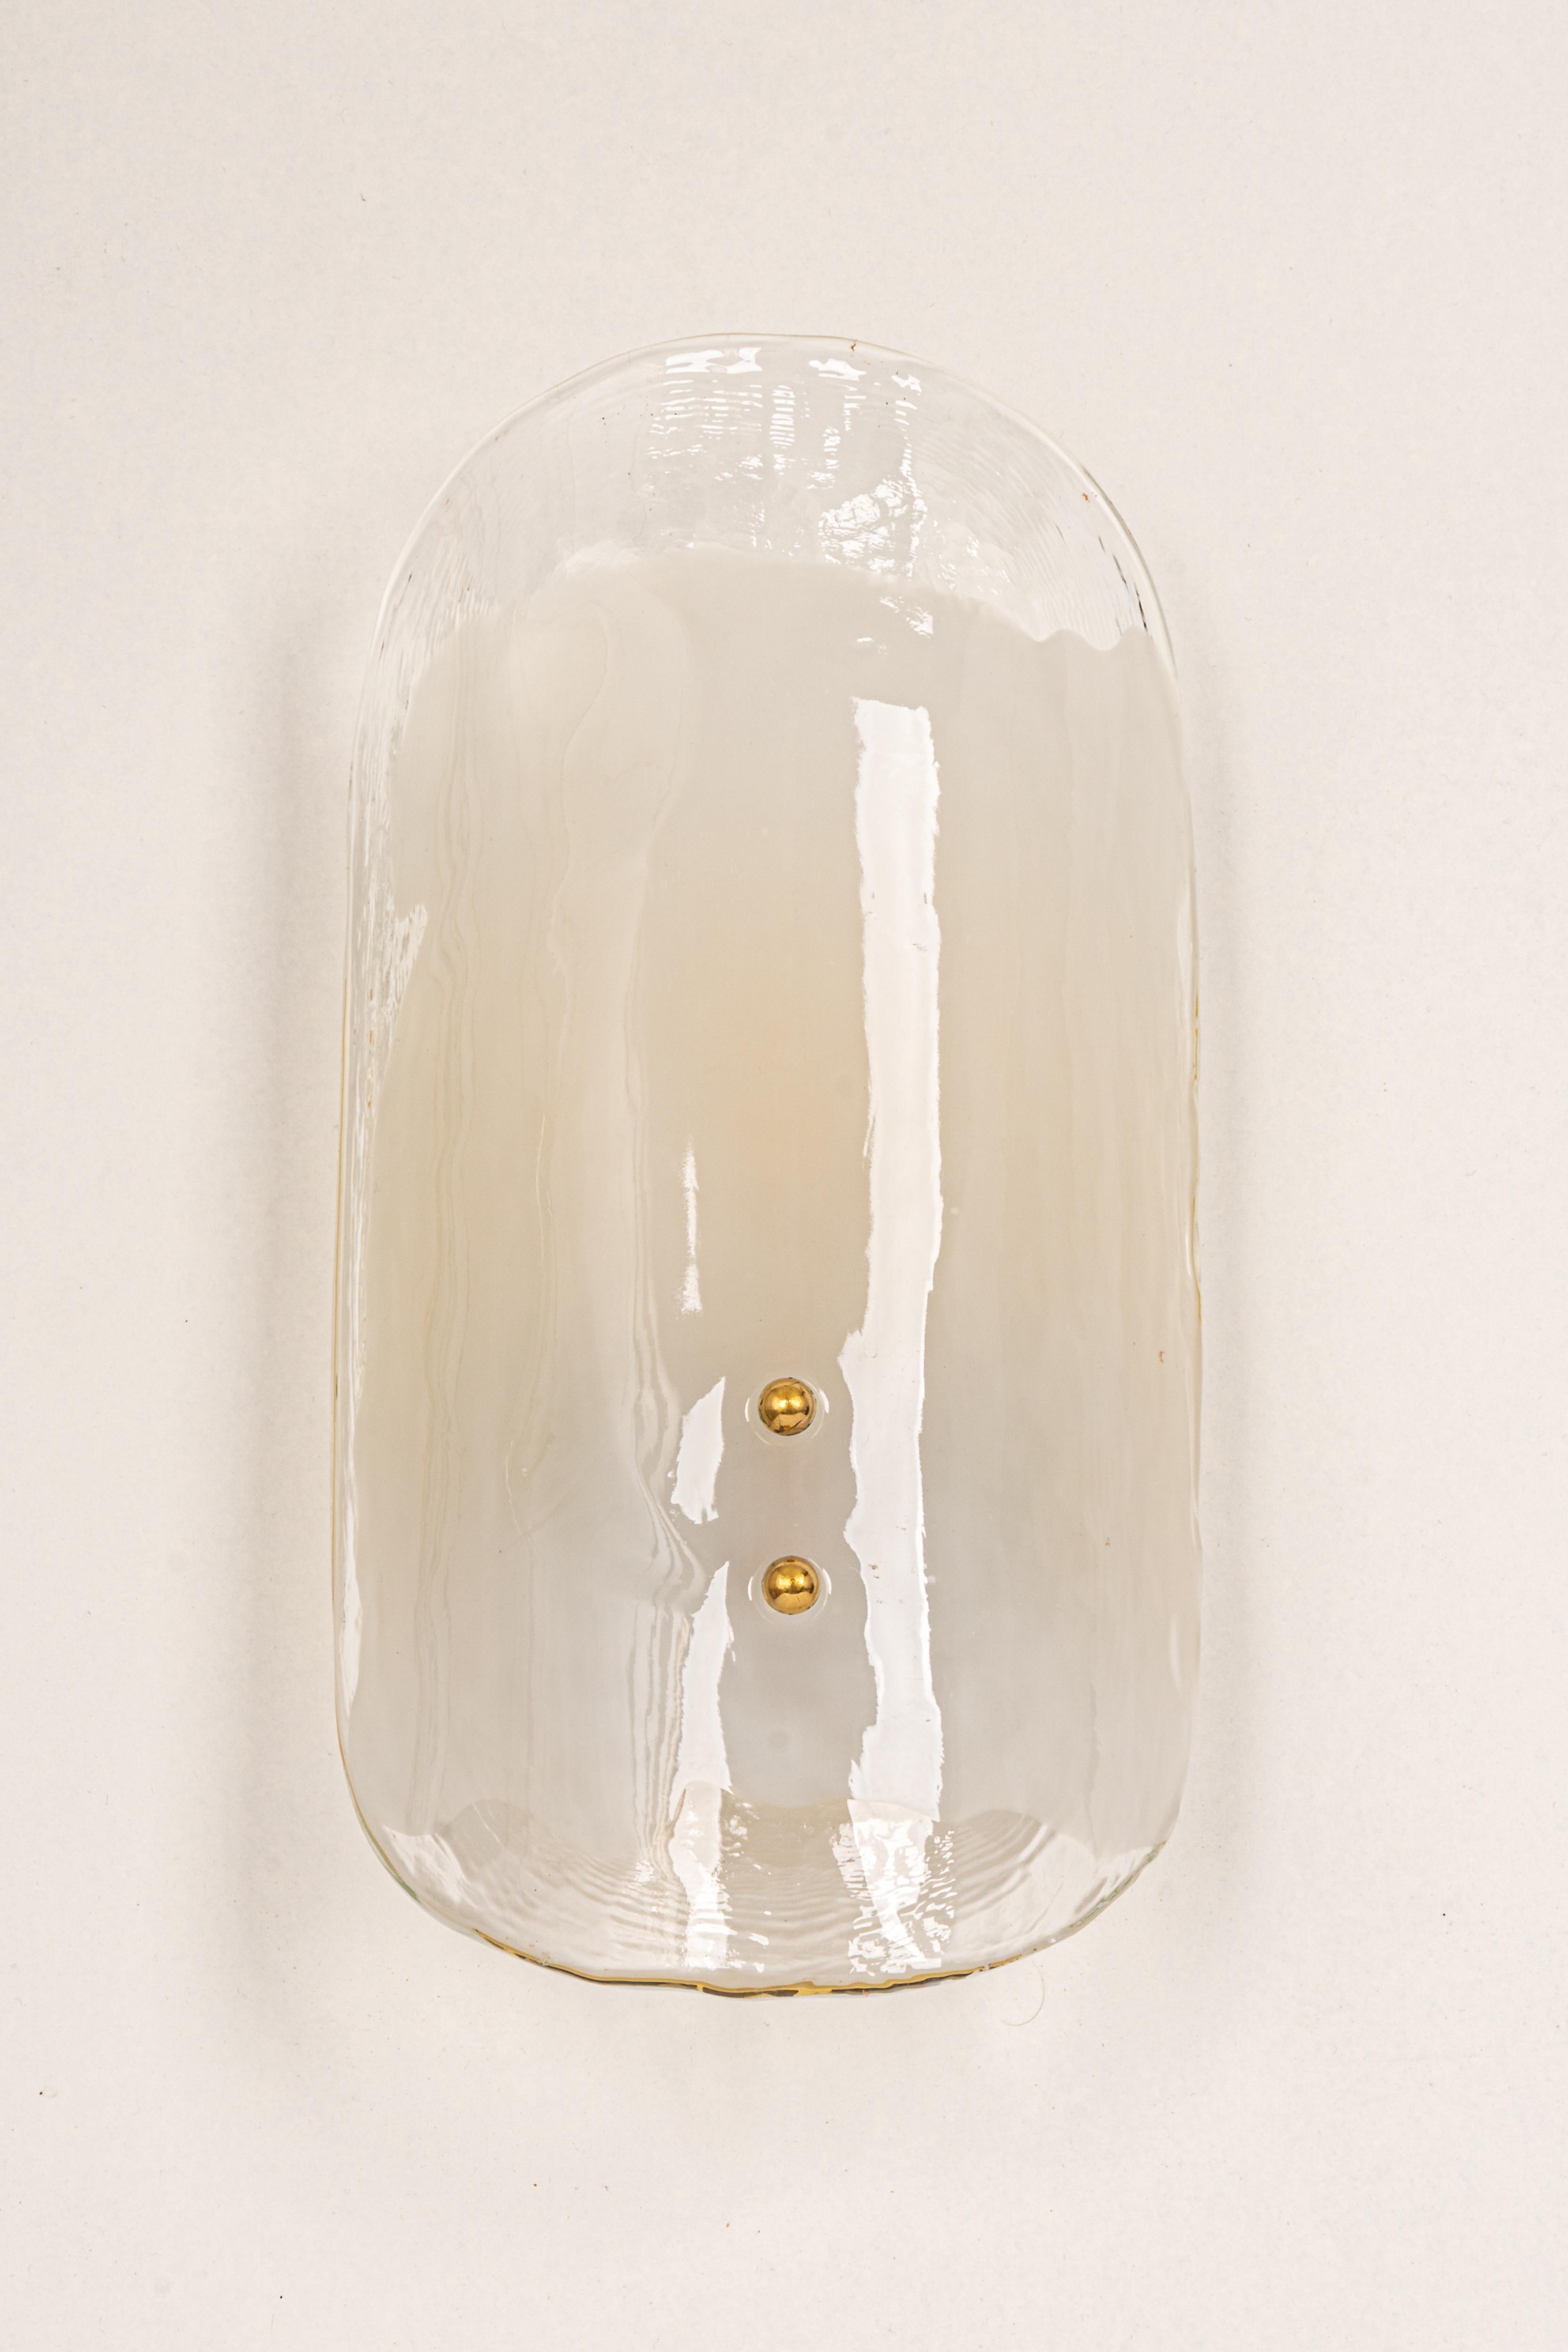 Wonderful mid-century wall sconce with murano glass, made by Kalmar, Austria, manufactured, circa 1960-1969.
High quality and in very good condition. Cleaned, well-wired, and ready to use.  

The sconce requires 2 x E14 standard bulbs with 40W